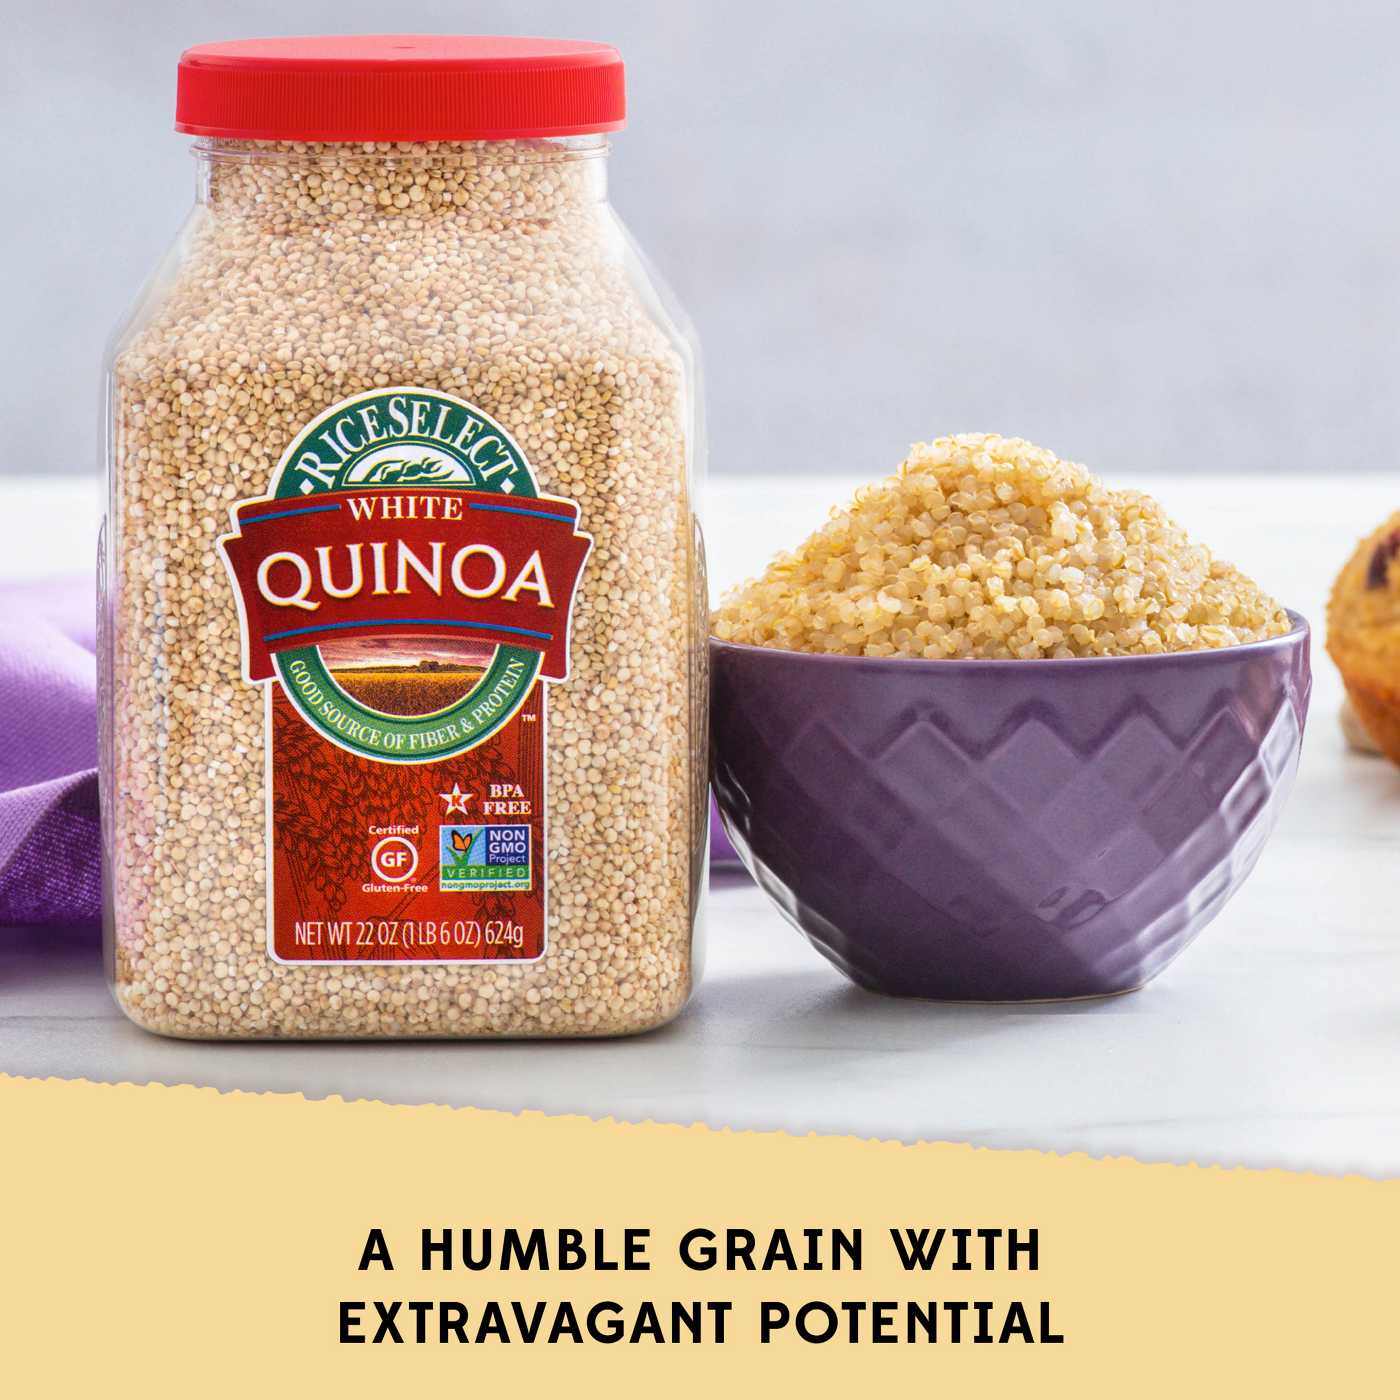 RiceSelect White Quinoa; image 6 of 6